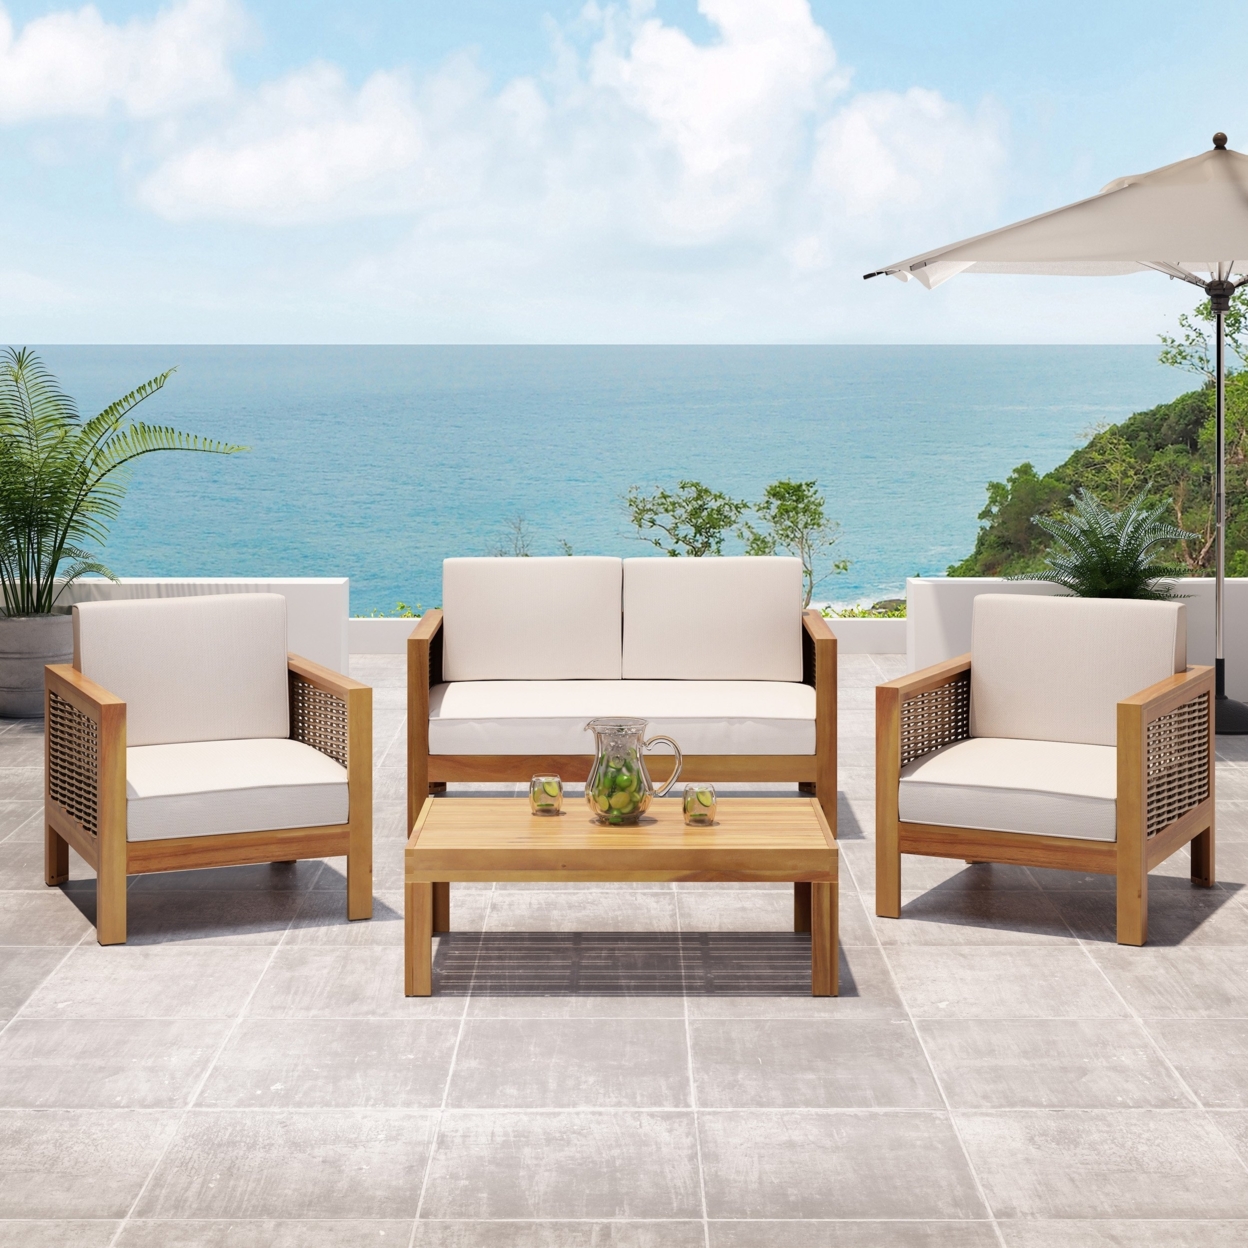 Mayes Outdoor 4 Seater Acacia Wood Chat Set With Wicker Accents - Gray/mixed Gray/dark Gray